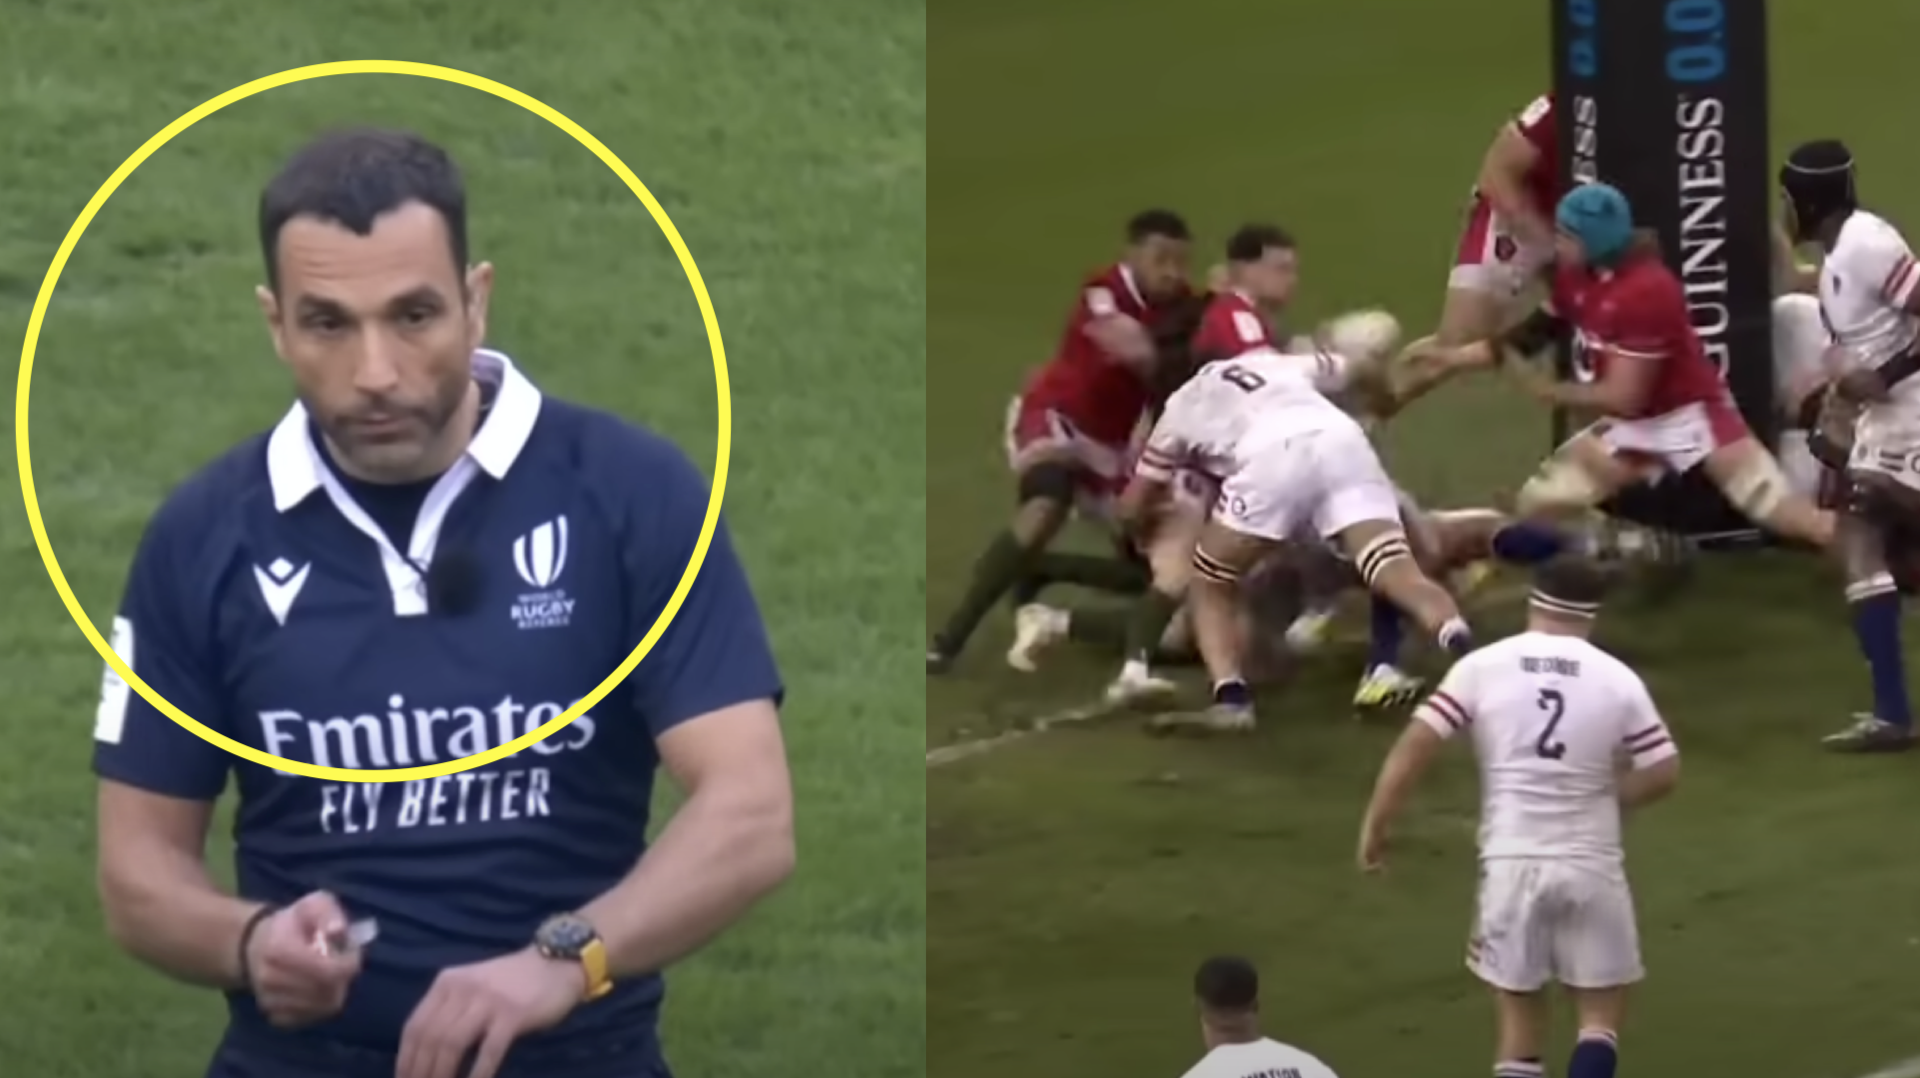 Referee reported to have had better view of England try than online trolls